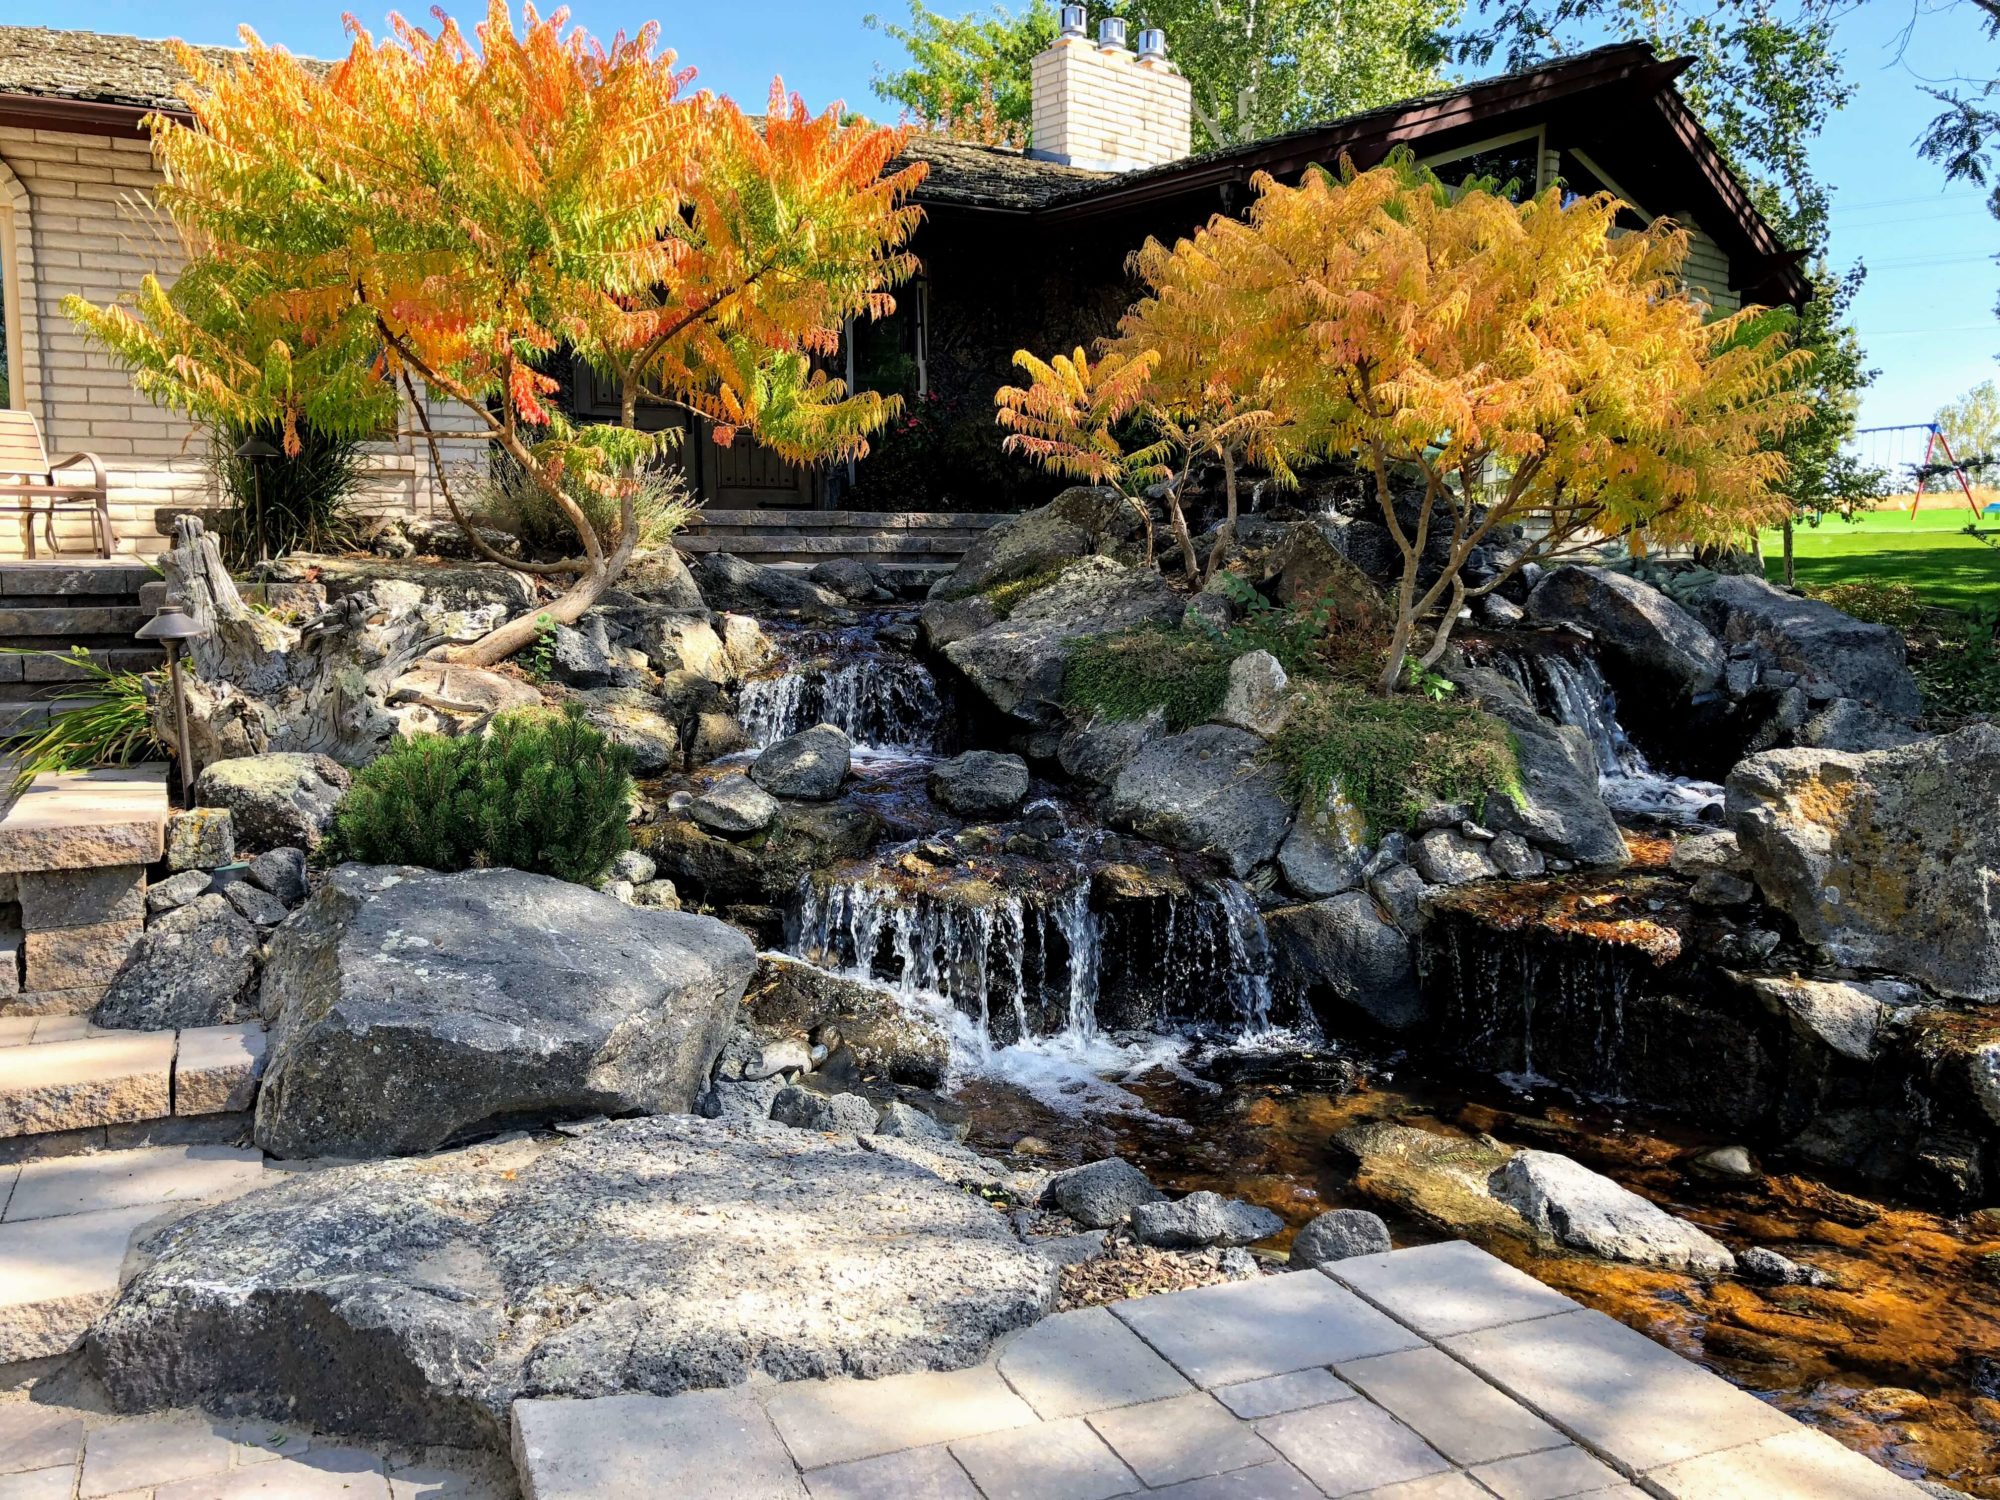 Professional water feature planned as a part of a residential landscaping project in Twin Falls, ID